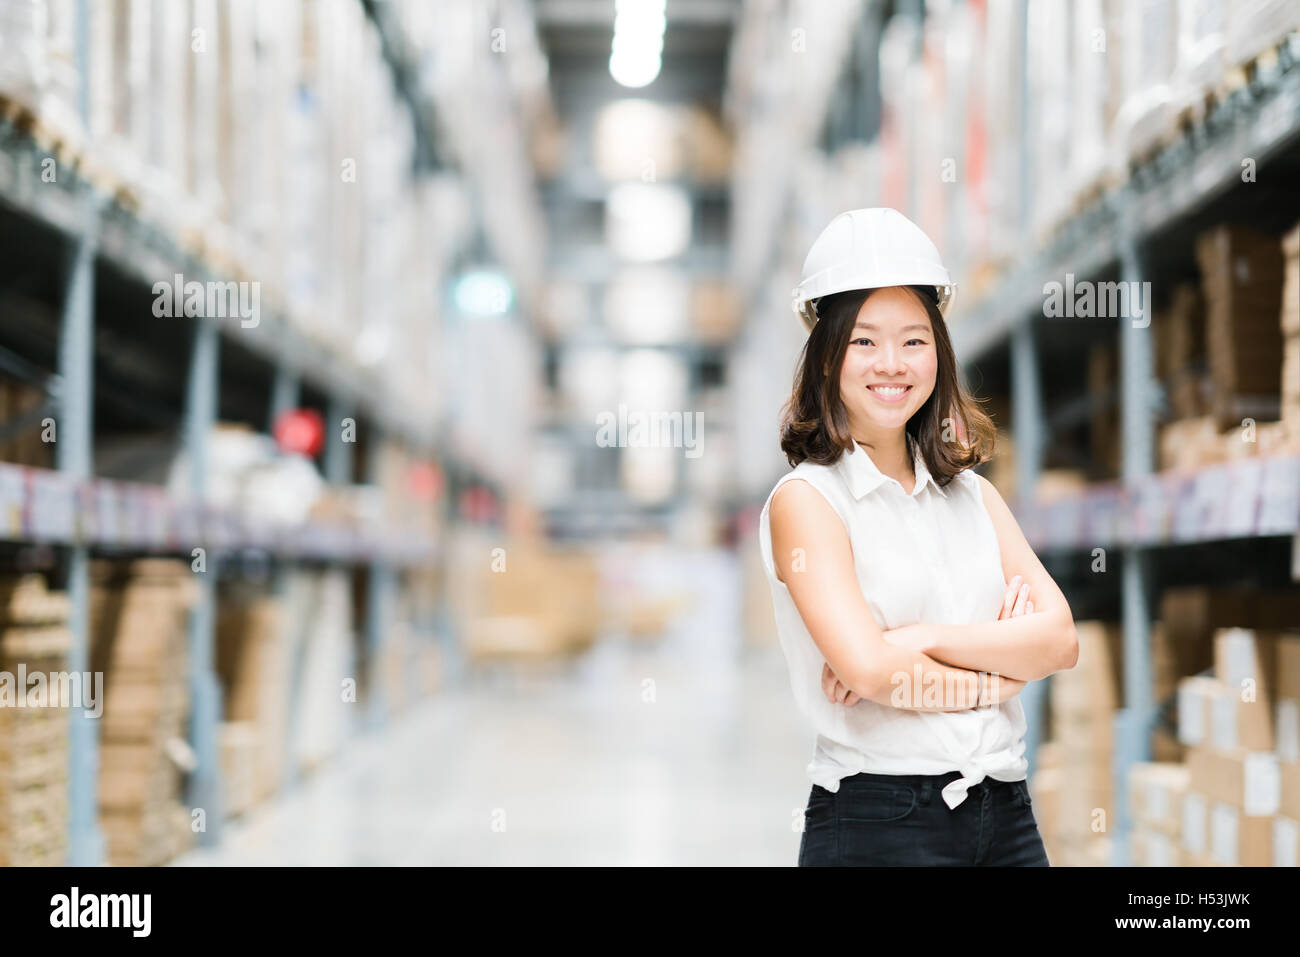 Beautiful young Asian engineer or technician smiling, warehouse or factory blur background, industry or logistic concept Stock Photo